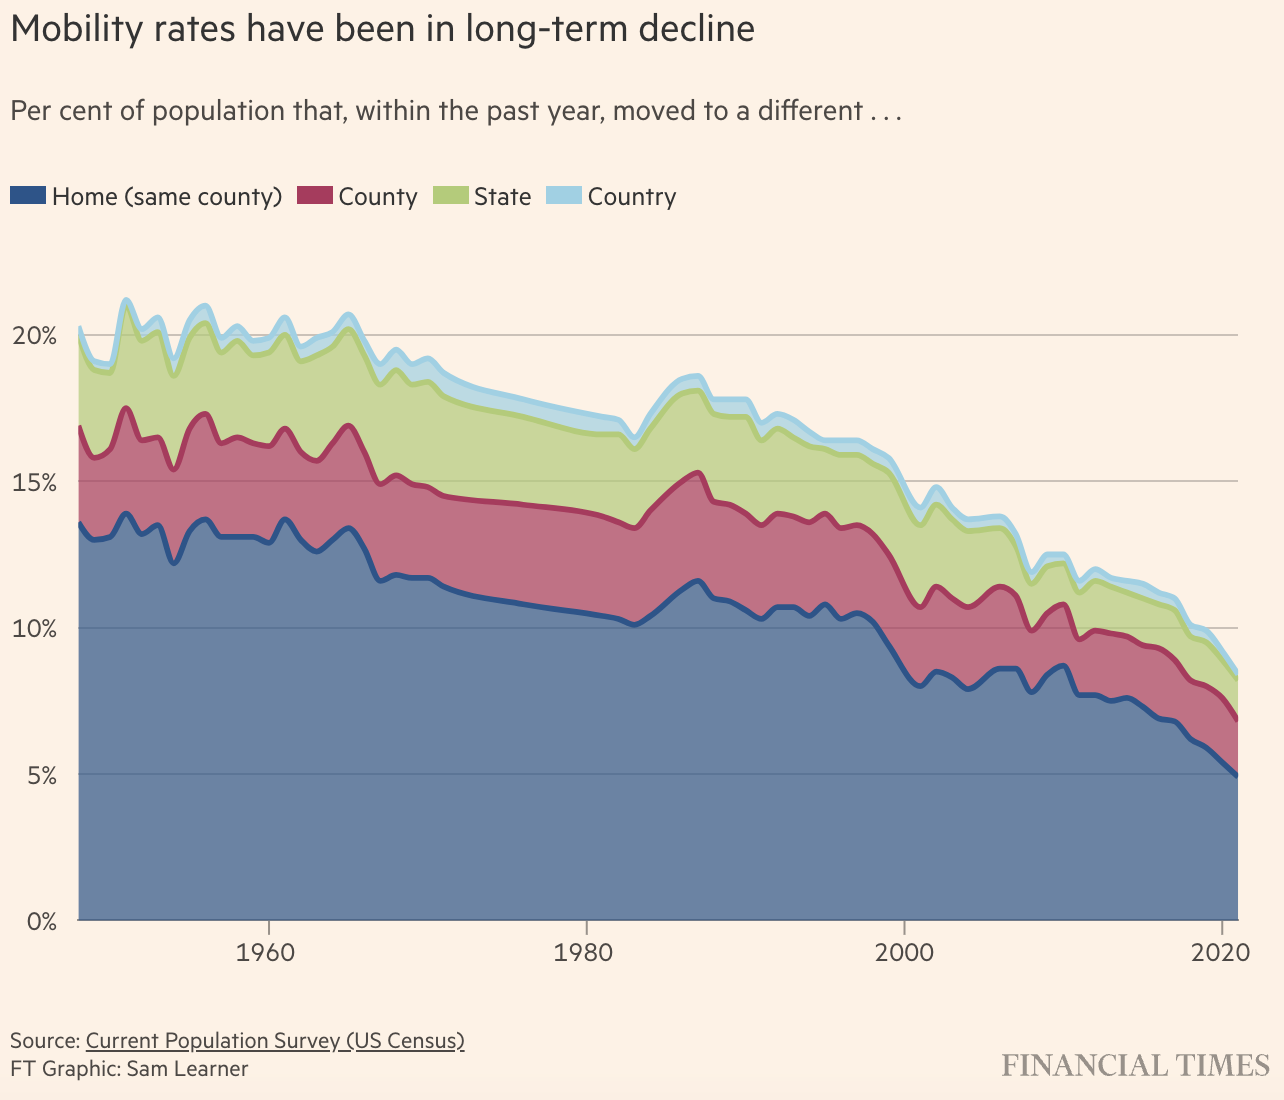 Declining mobility rates graph via Financial Times